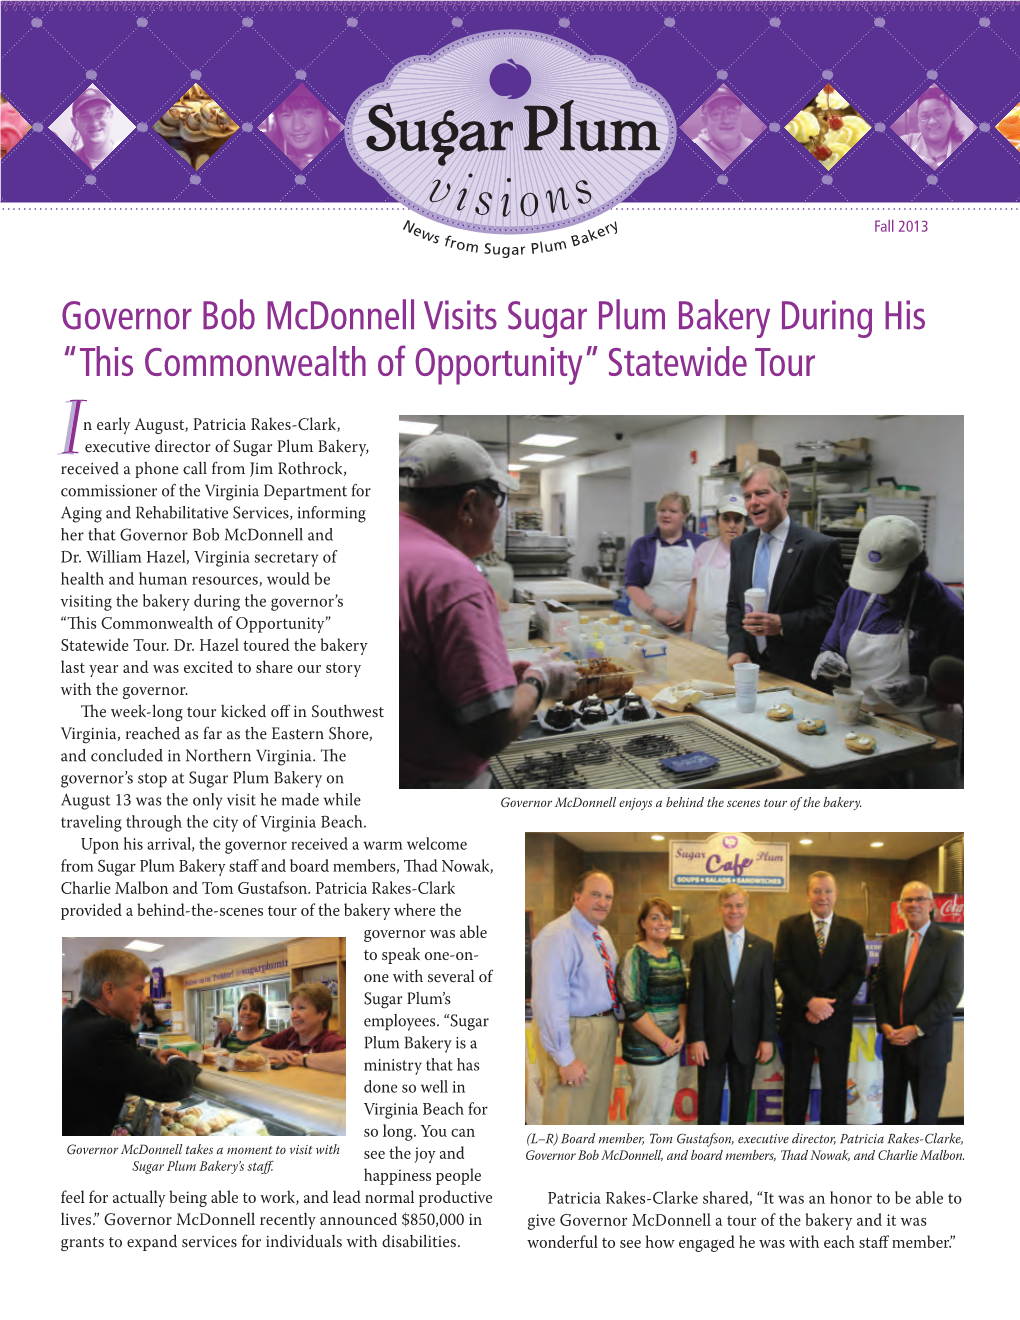 Governor Bob Mcdonnell Visits Sugar Plum Bakery During His “This Commonwealth of Opportunity” Statewide Tour